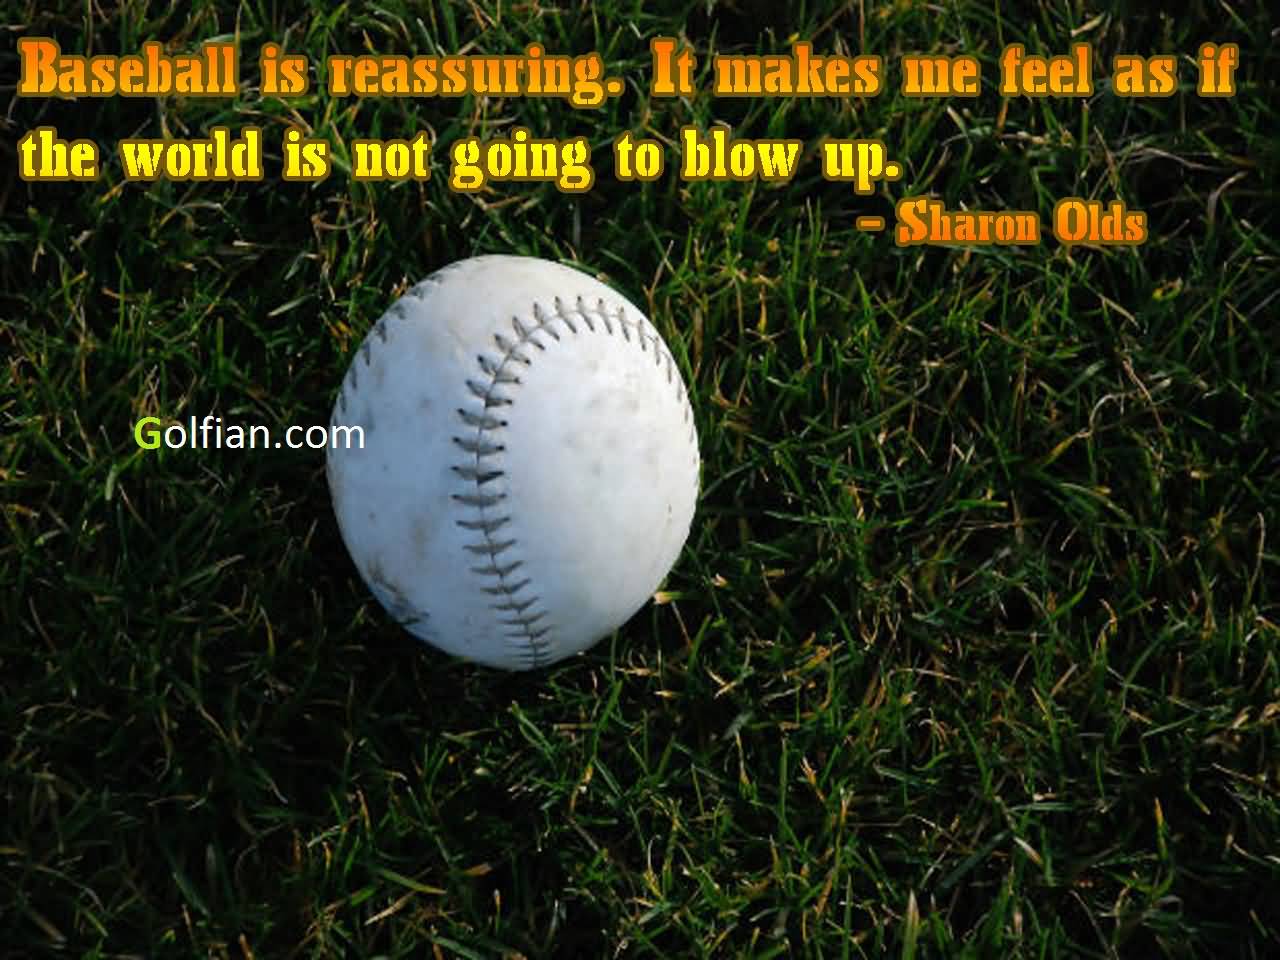 Inspirational Sports Quotes Wallpapers - Top Free ...